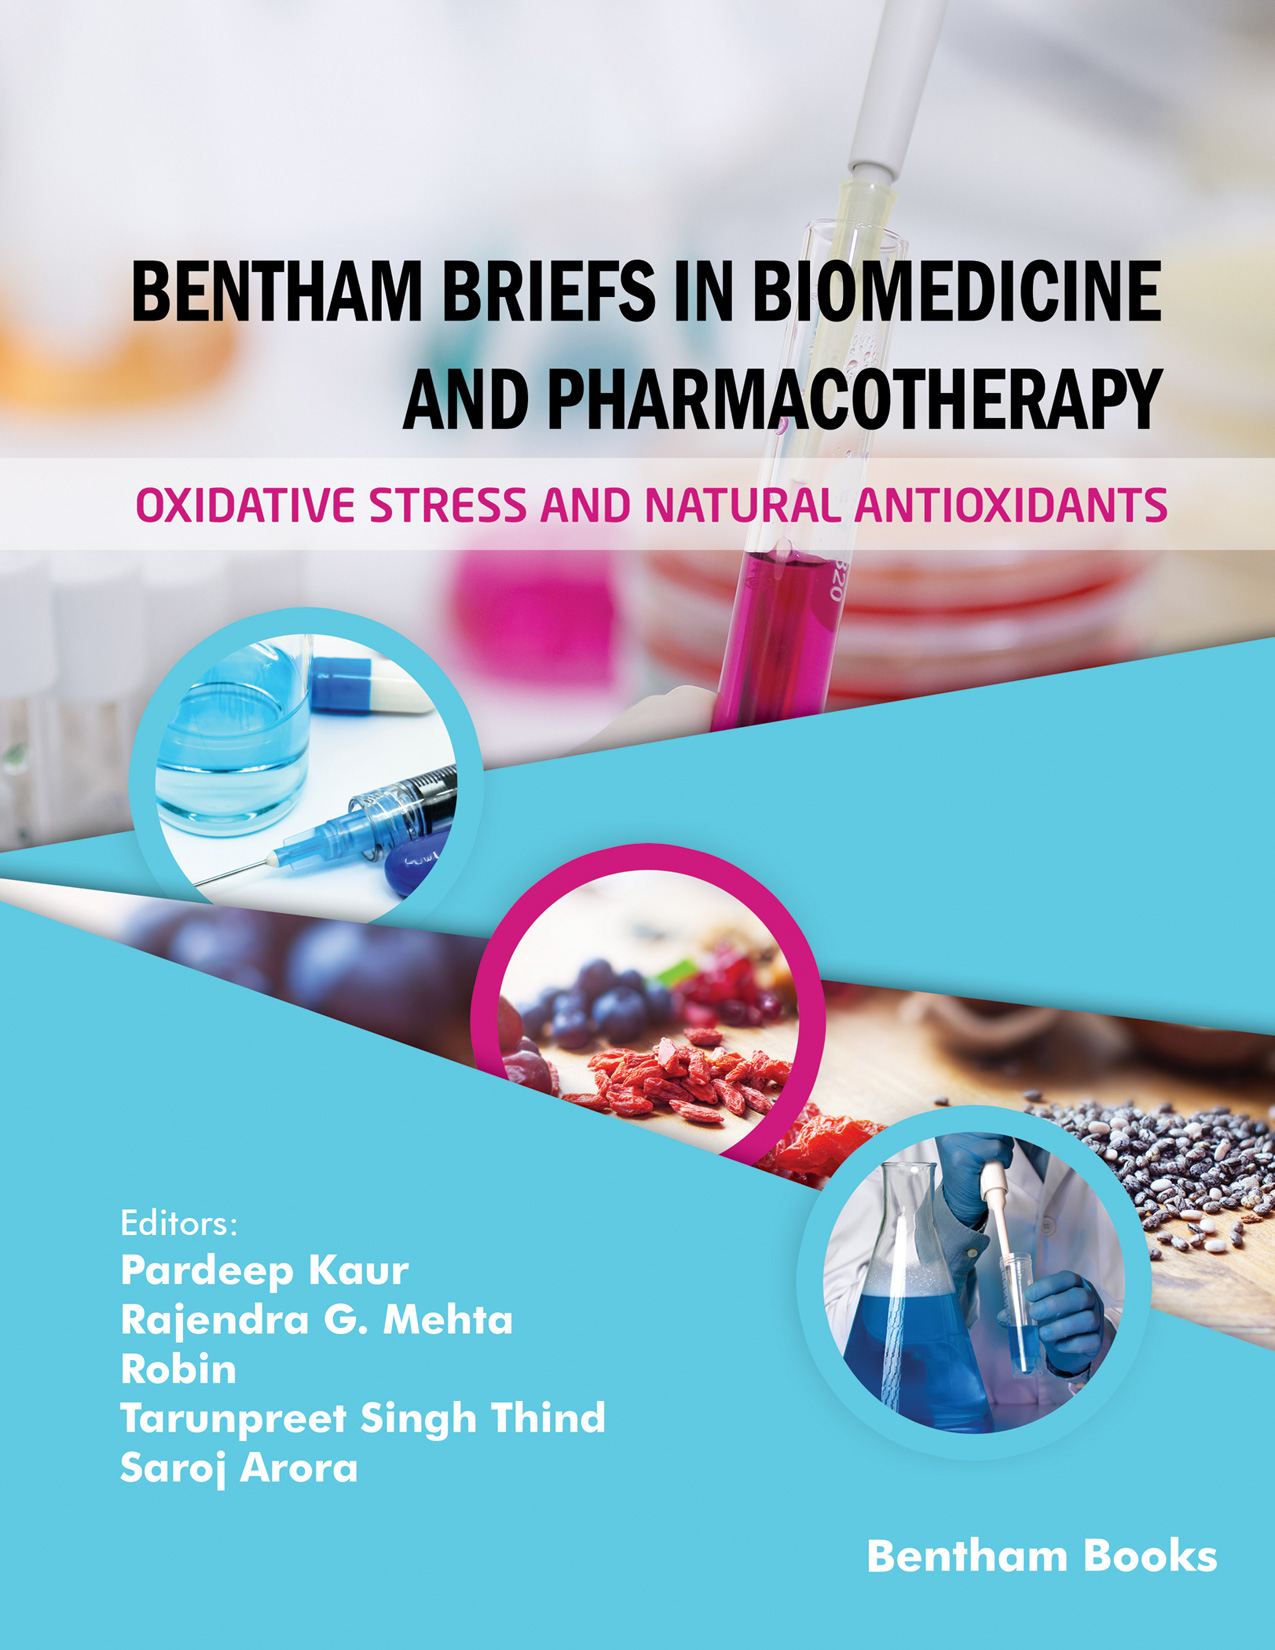 Bentham Briefs in Biomedicine and Pharmacotherapy: Oxidative Stress and Natural Antioxidants